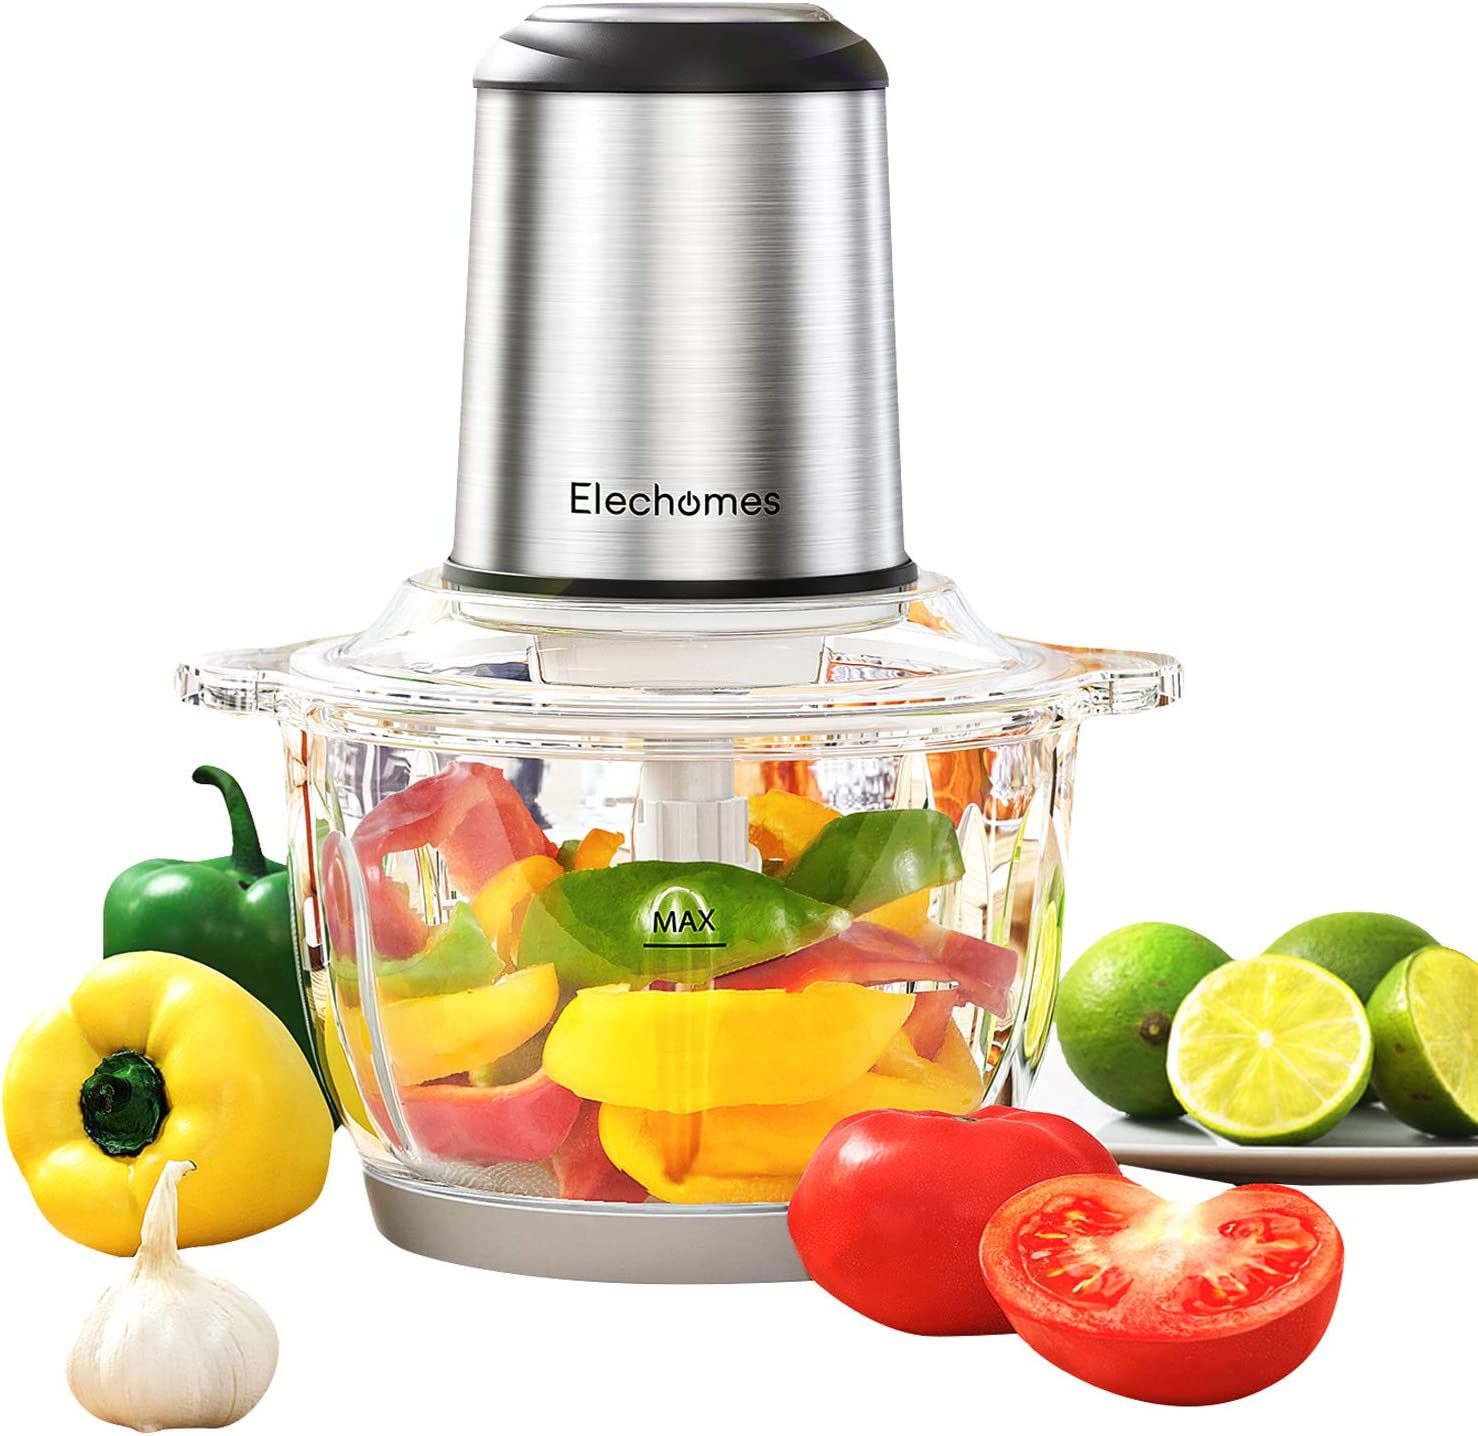 Elechomes Multi Chopper, Kitchen Electric Universal Chopper with 2 L Glass Container, 300 W Motor & 4 Removable Double Layer Robust Stainless Steel Blades, BPA-Free